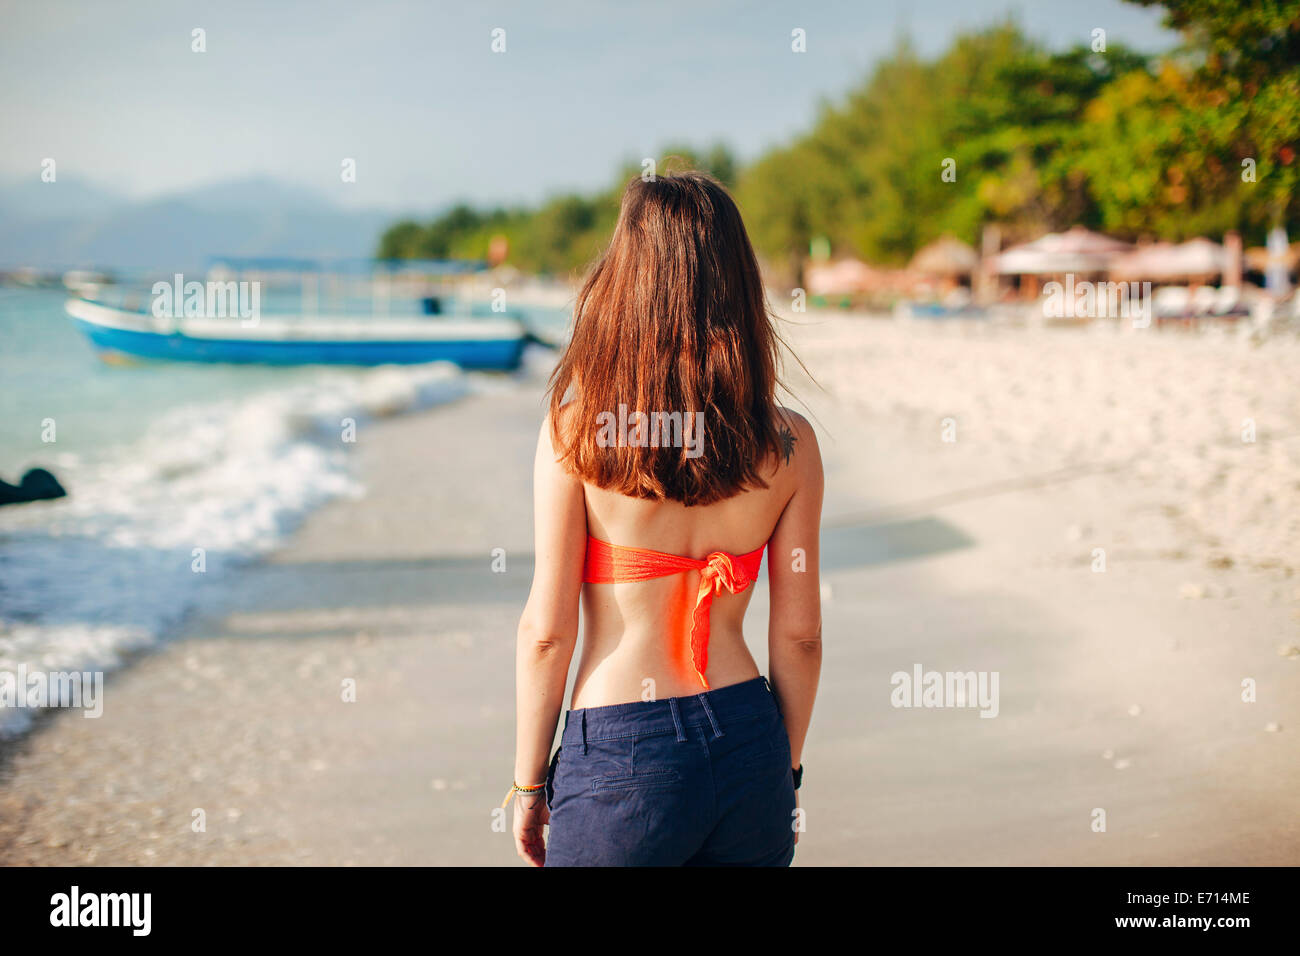 Indonesia, Gili Islands, woman standing on the beach, back view Stock Photo